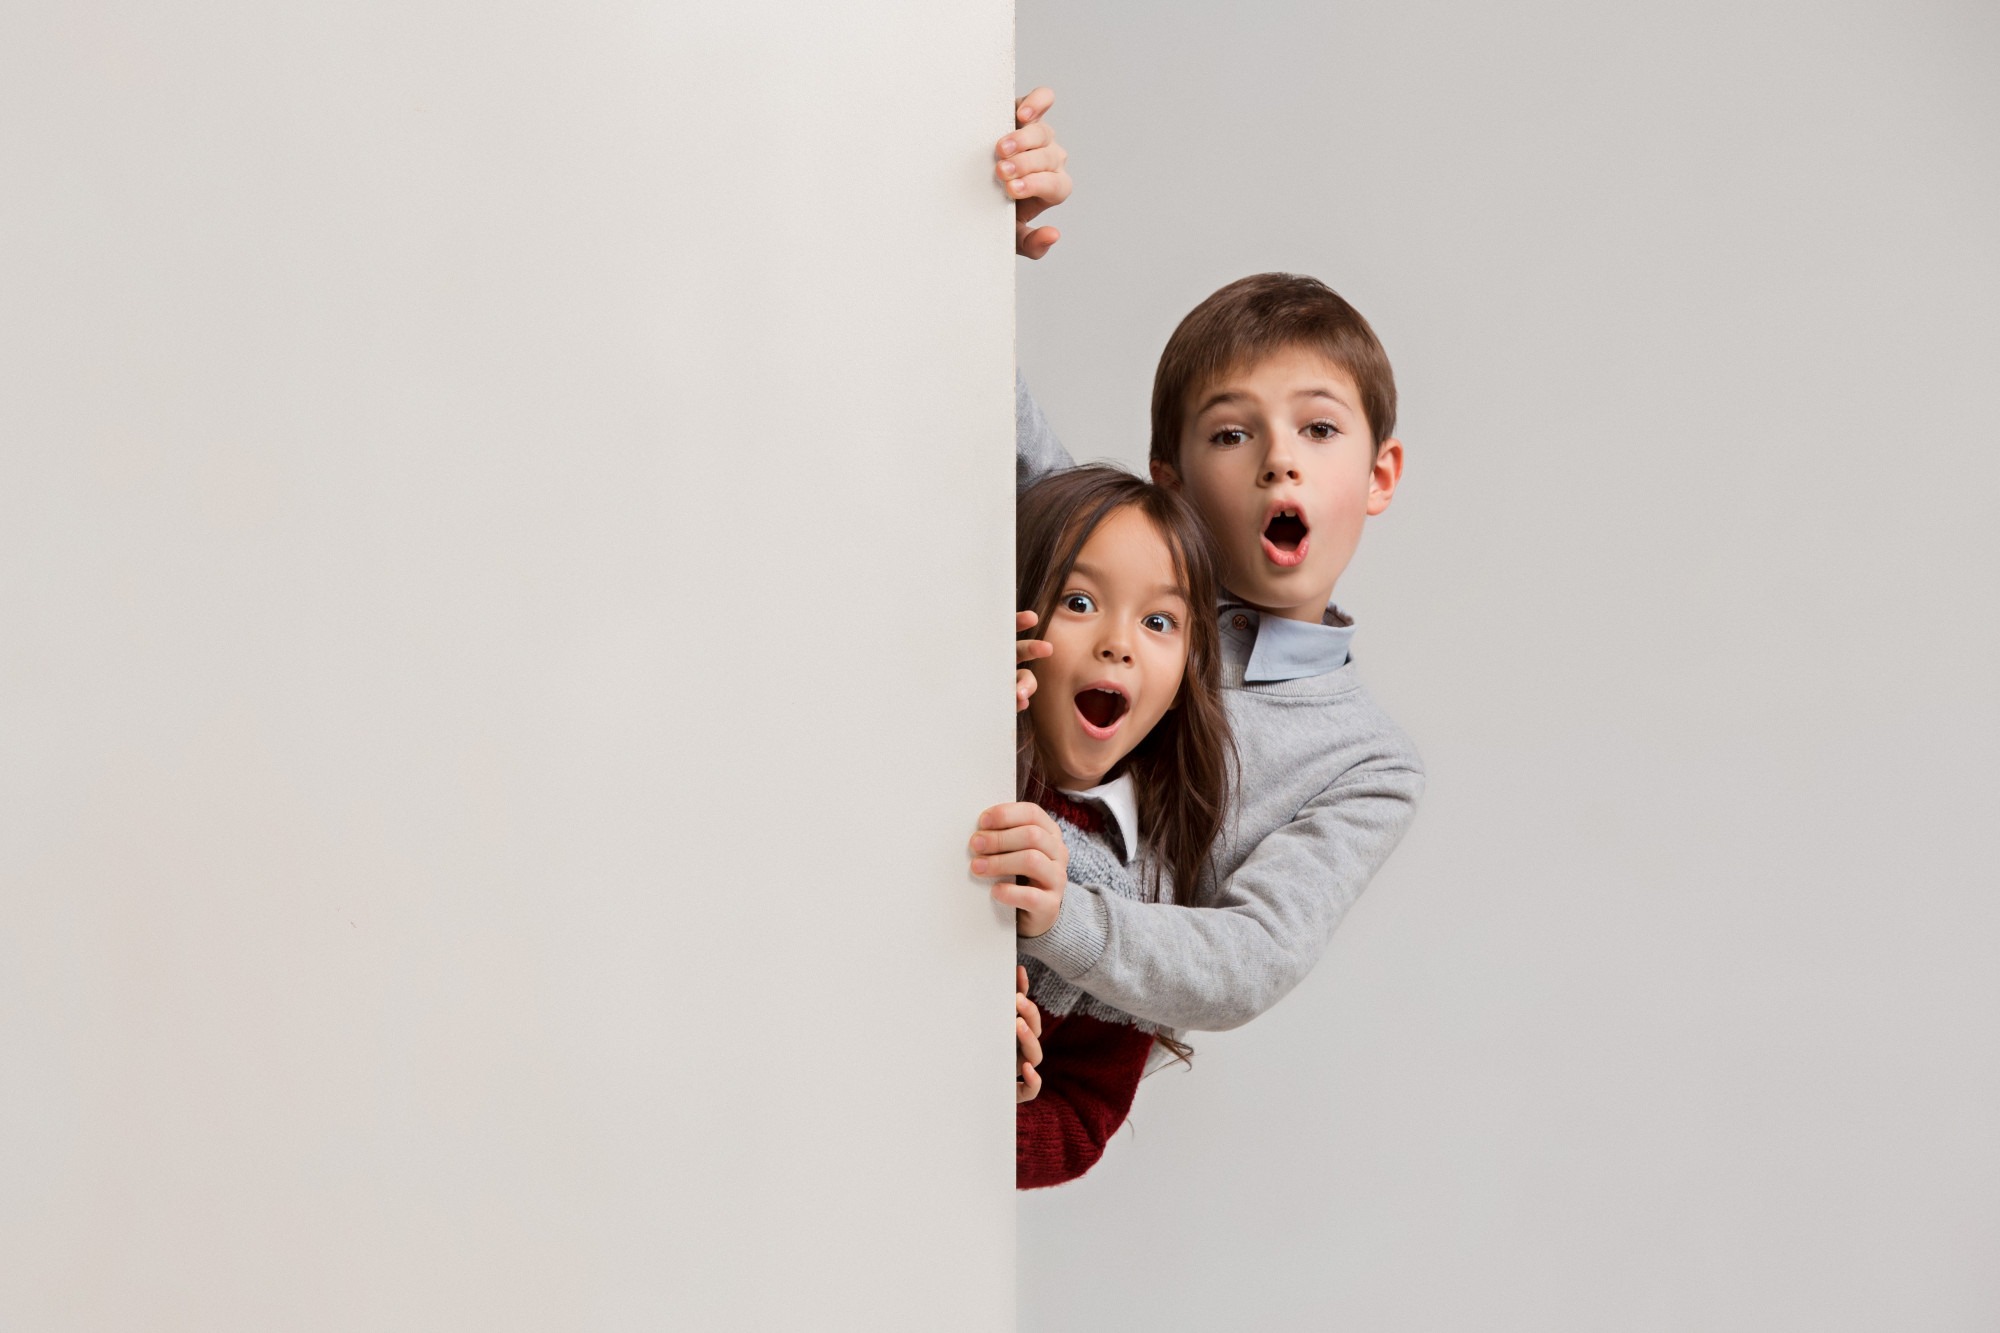 banner with a surprised children peeking at the edge